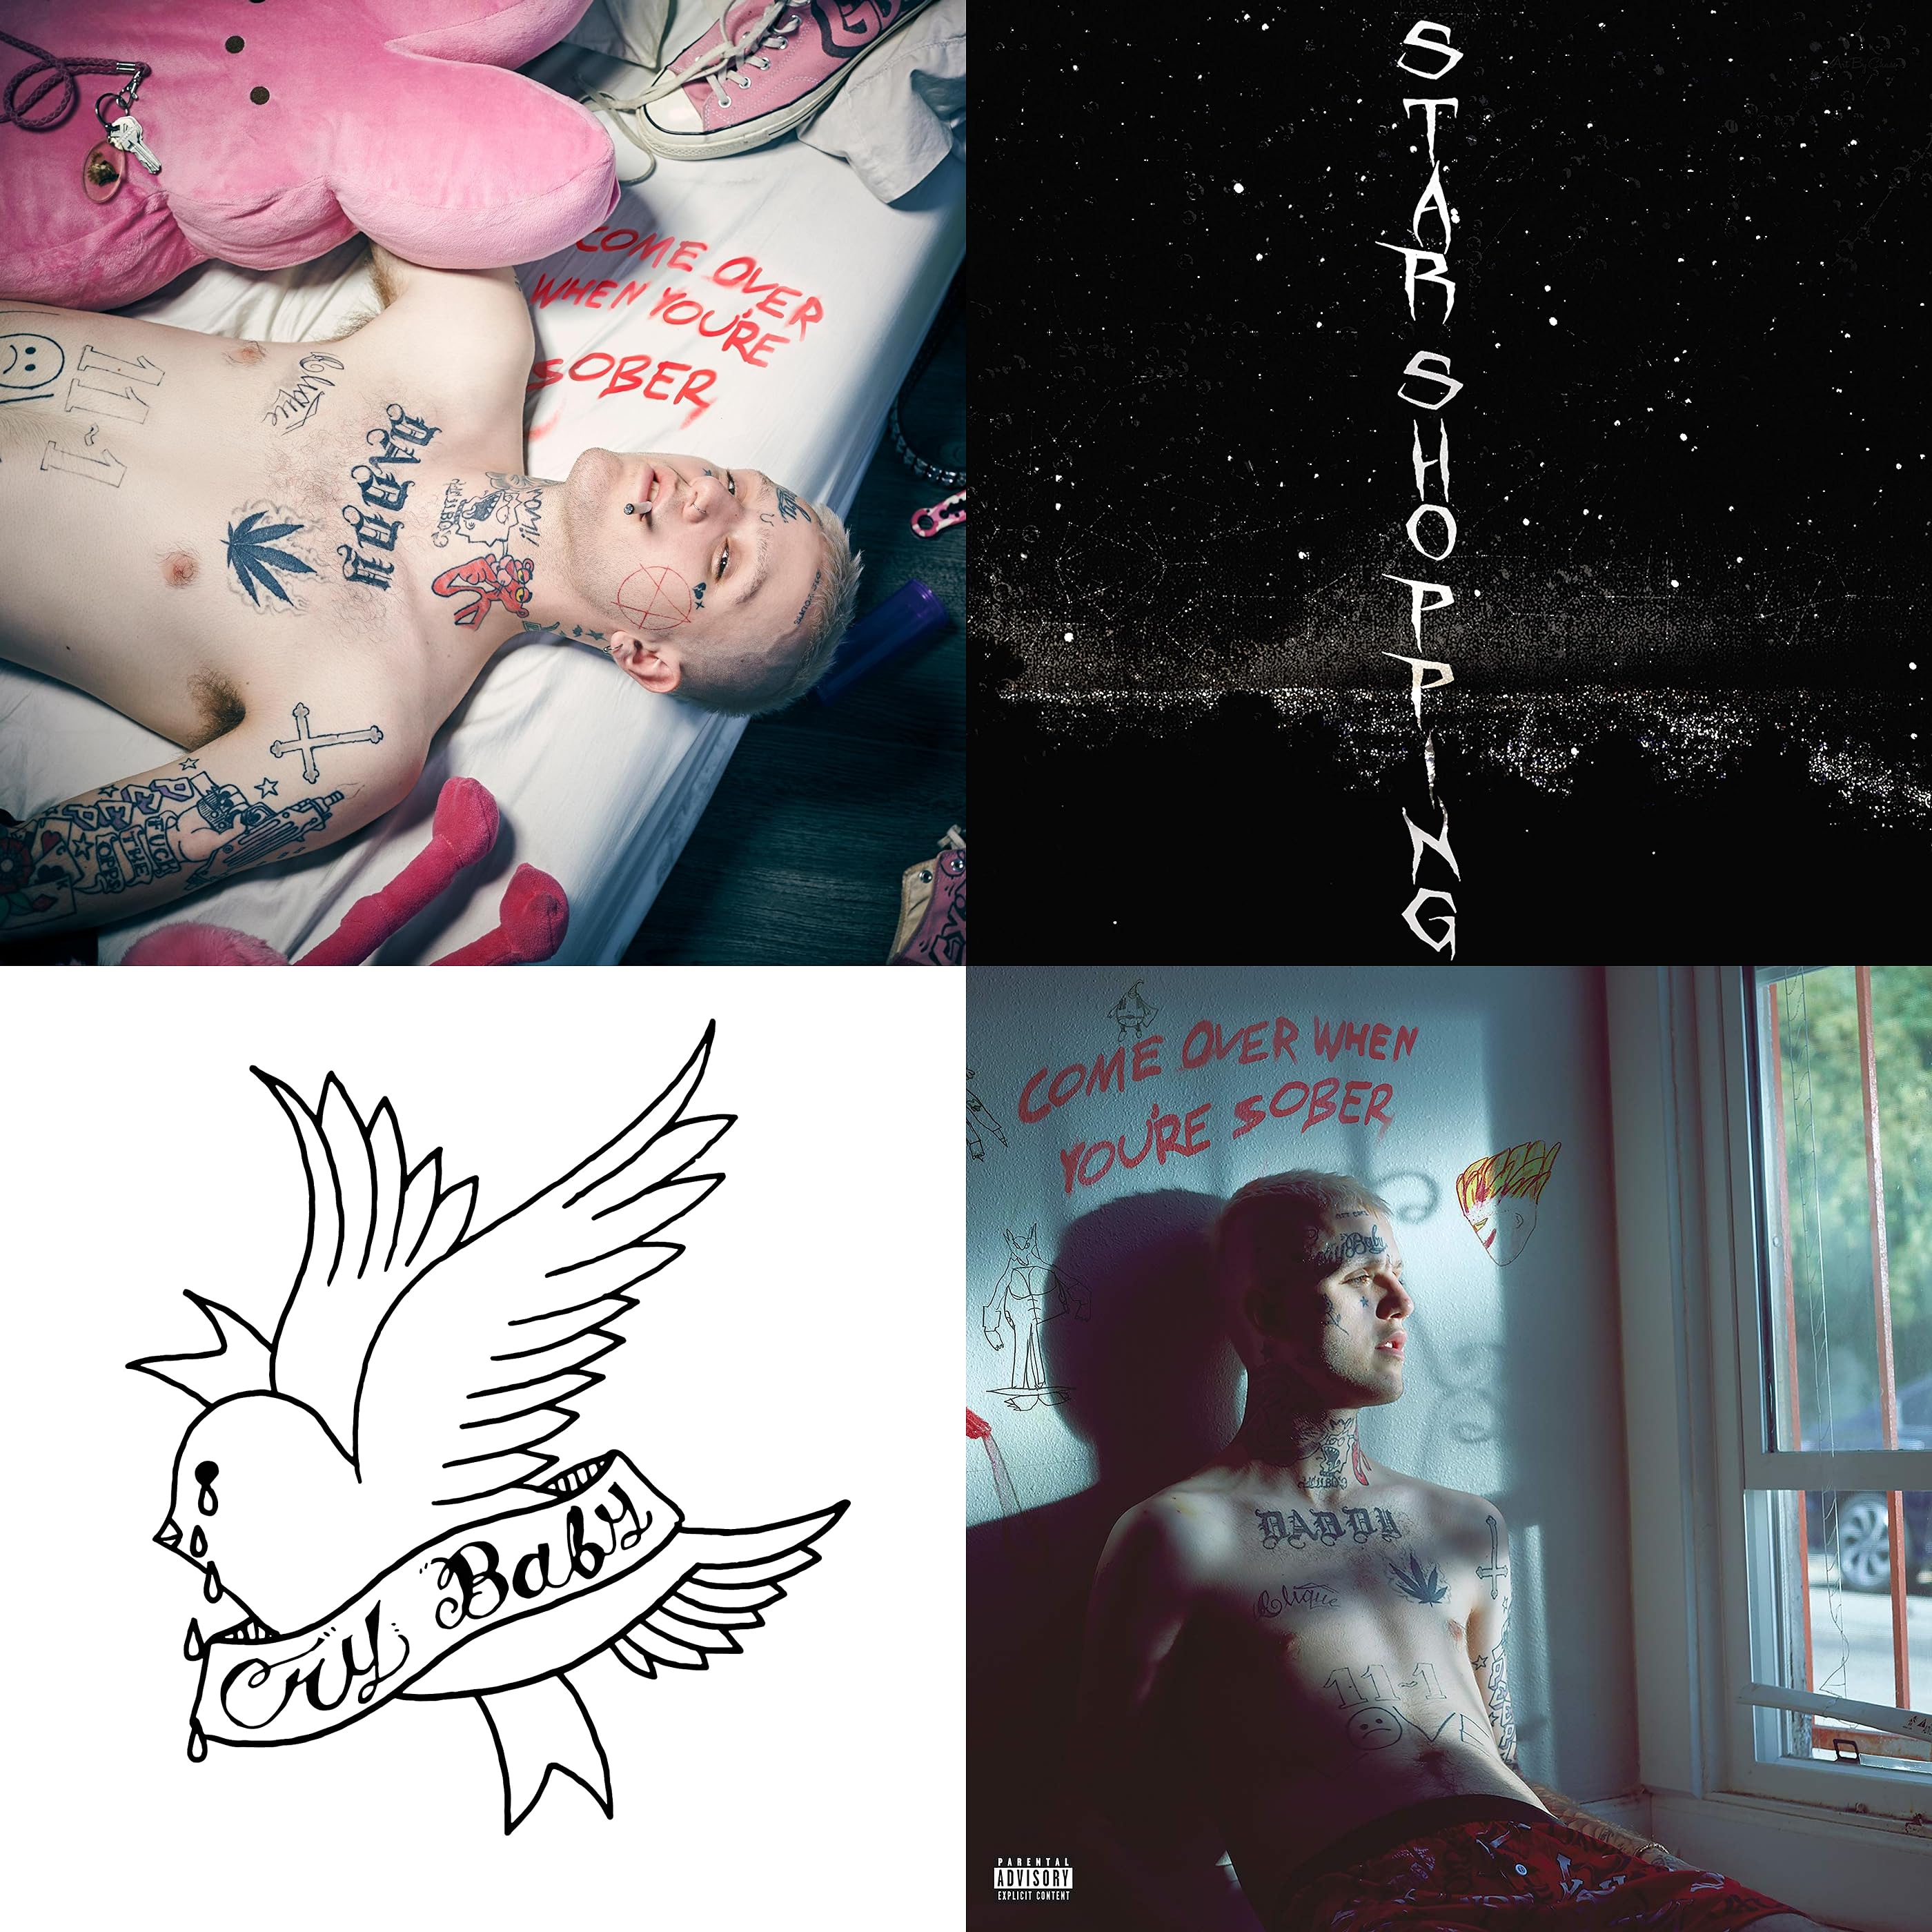 Lil Peep's discography, including 'Cry Baby', 'Come Over When You're Sober', and 'Star Shopping'. - Lil Peep